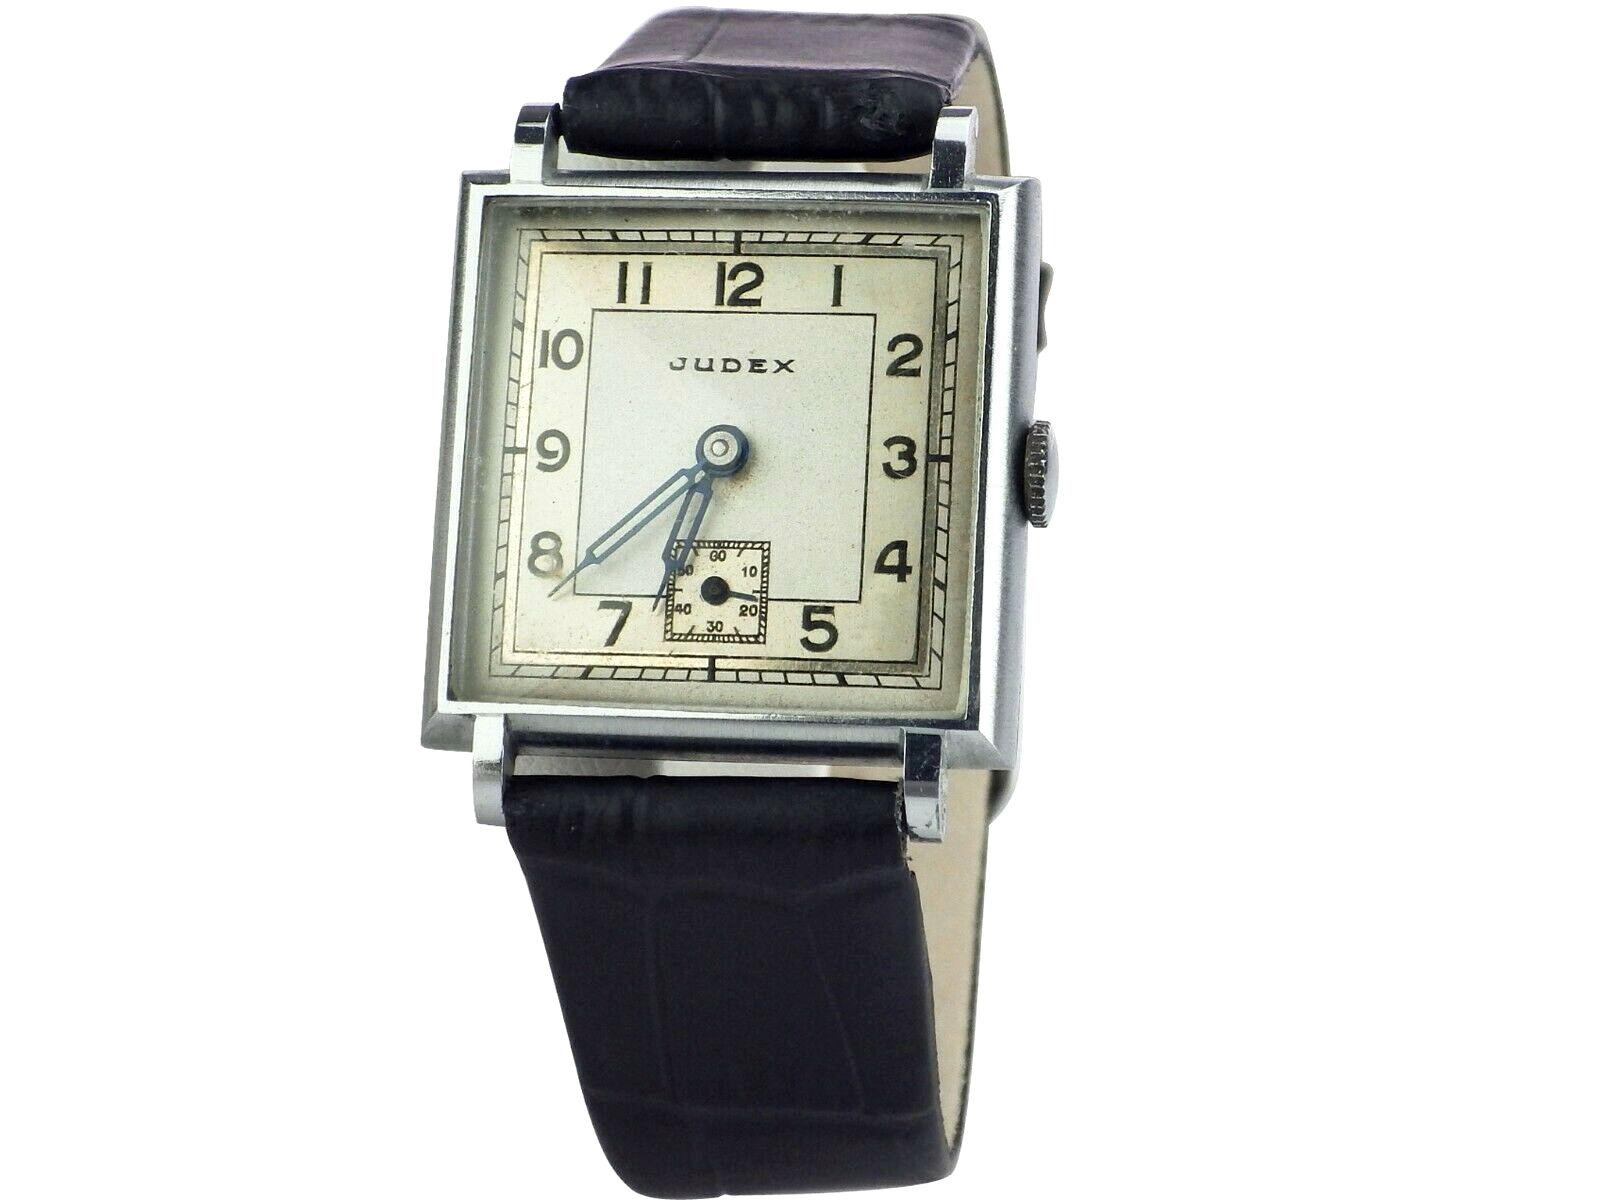 Men's Art Deco Gents Manual Wristwatch by French Watchmakers Judex, circa 1930